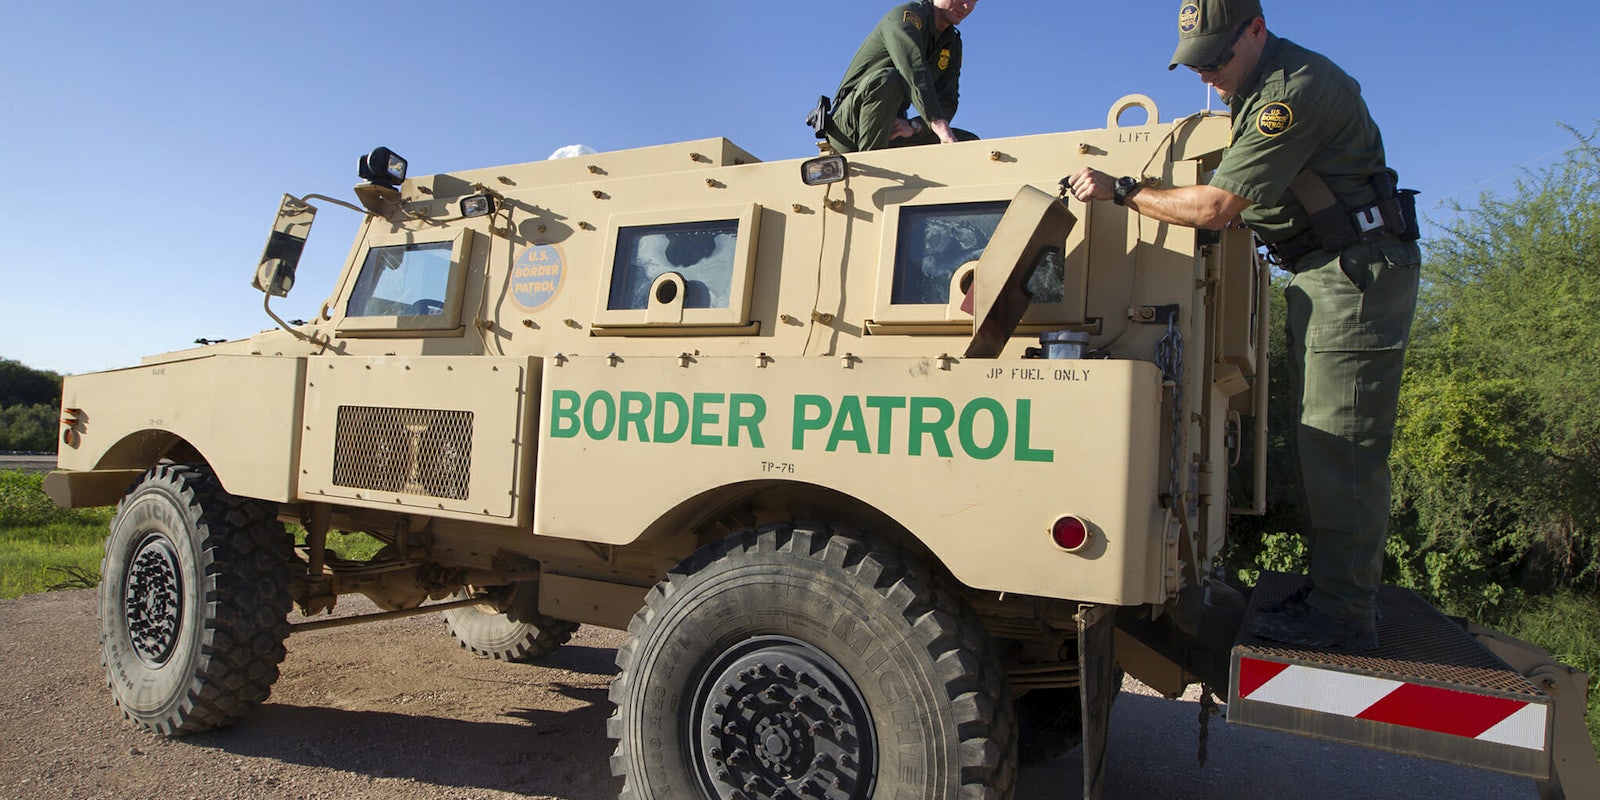 Border Patrol Agents conduct an operations check on a Mine Resistant Ambush Protected (MRAP) vehicle on the South Texas border